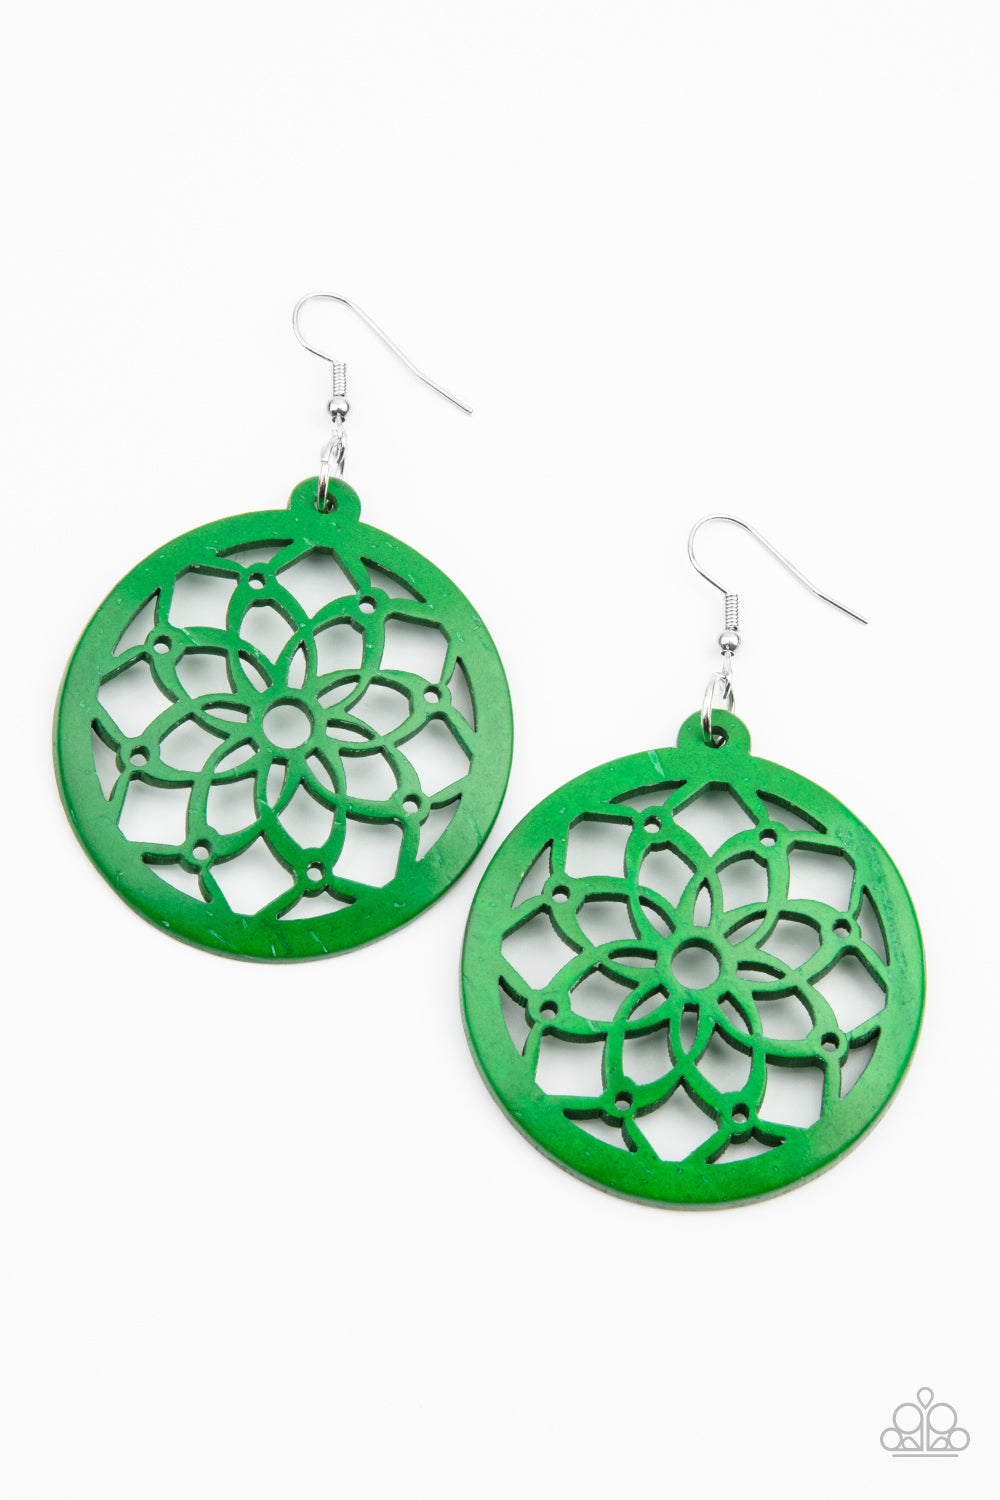 &lt;P&gt;The center of a green wooden frame has been cutout in an airy mandala-like pattern, creating a colorful flower. Earring attaches to a standard fishhook fitting.
 &lt;/P&gt;  

&lt;P&gt; &lt;I&gt;  Sold as one pair of earrings. &lt;/I&gt;  &lt;/P&gt;


&lt;img src=\&quot;https://d9b54x484lq62.cloudfront.net/paparazzi/shopping/images/517_tag150x115_1.png\&quot; alt=\&quot;New Kit\&quot; align=\&quot;middle\&quot; height=\&quot;50\&quot; width=\&quot;50\&quot;/&gt;